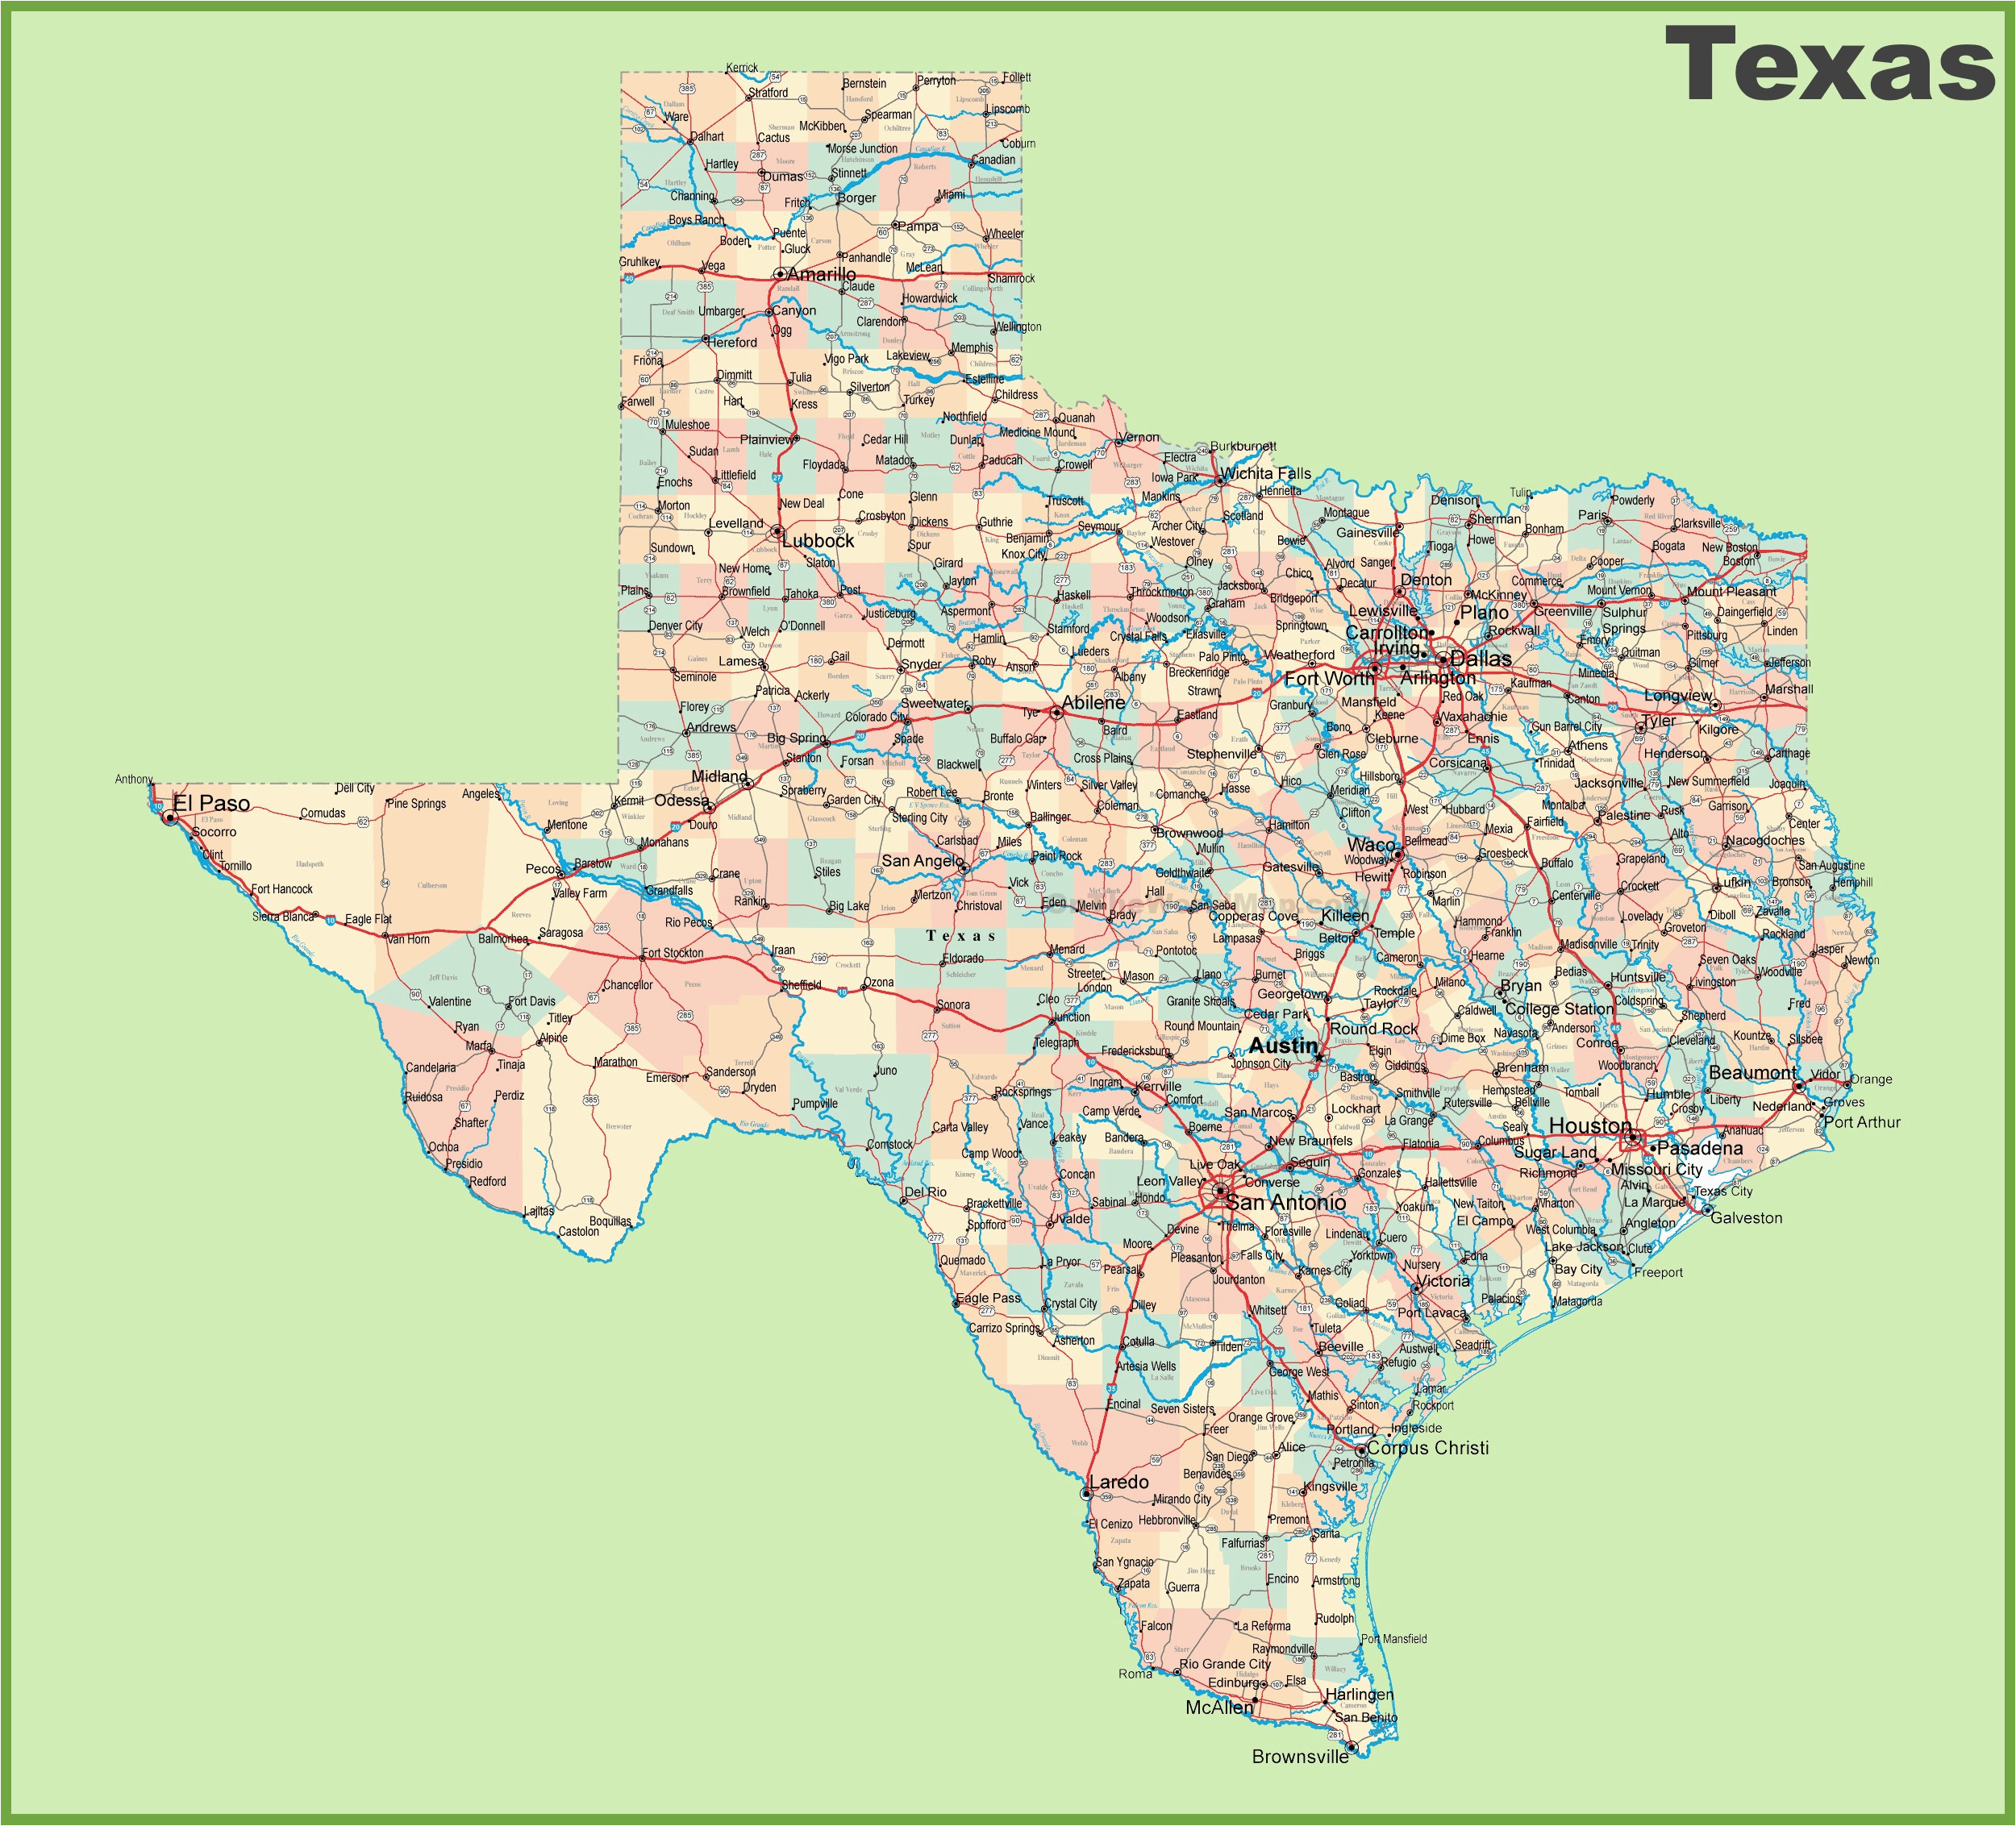 State Of Texas Map Showing Cities Road Map Of Texas with Cities